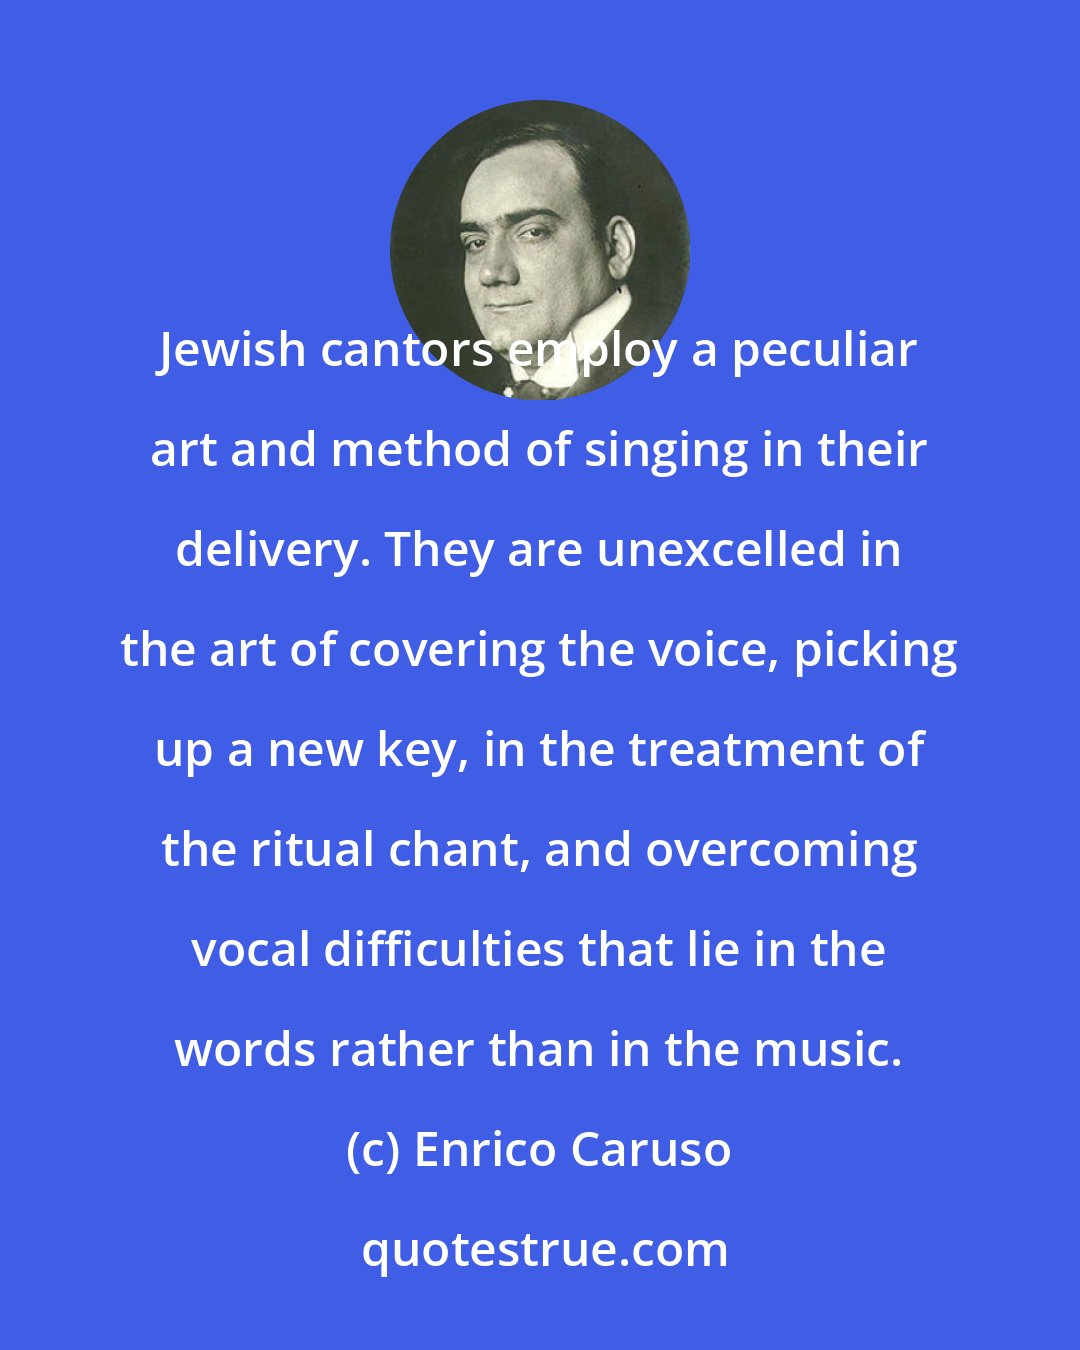 Enrico Caruso: Jewish cantors employ a peculiar art and method of singing in their delivery. They are unexcelled in the art of covering the voice, picking up a new key, in the treatment of the ritual chant, and overcoming vocal difficulties that lie in the words rather than in the music.